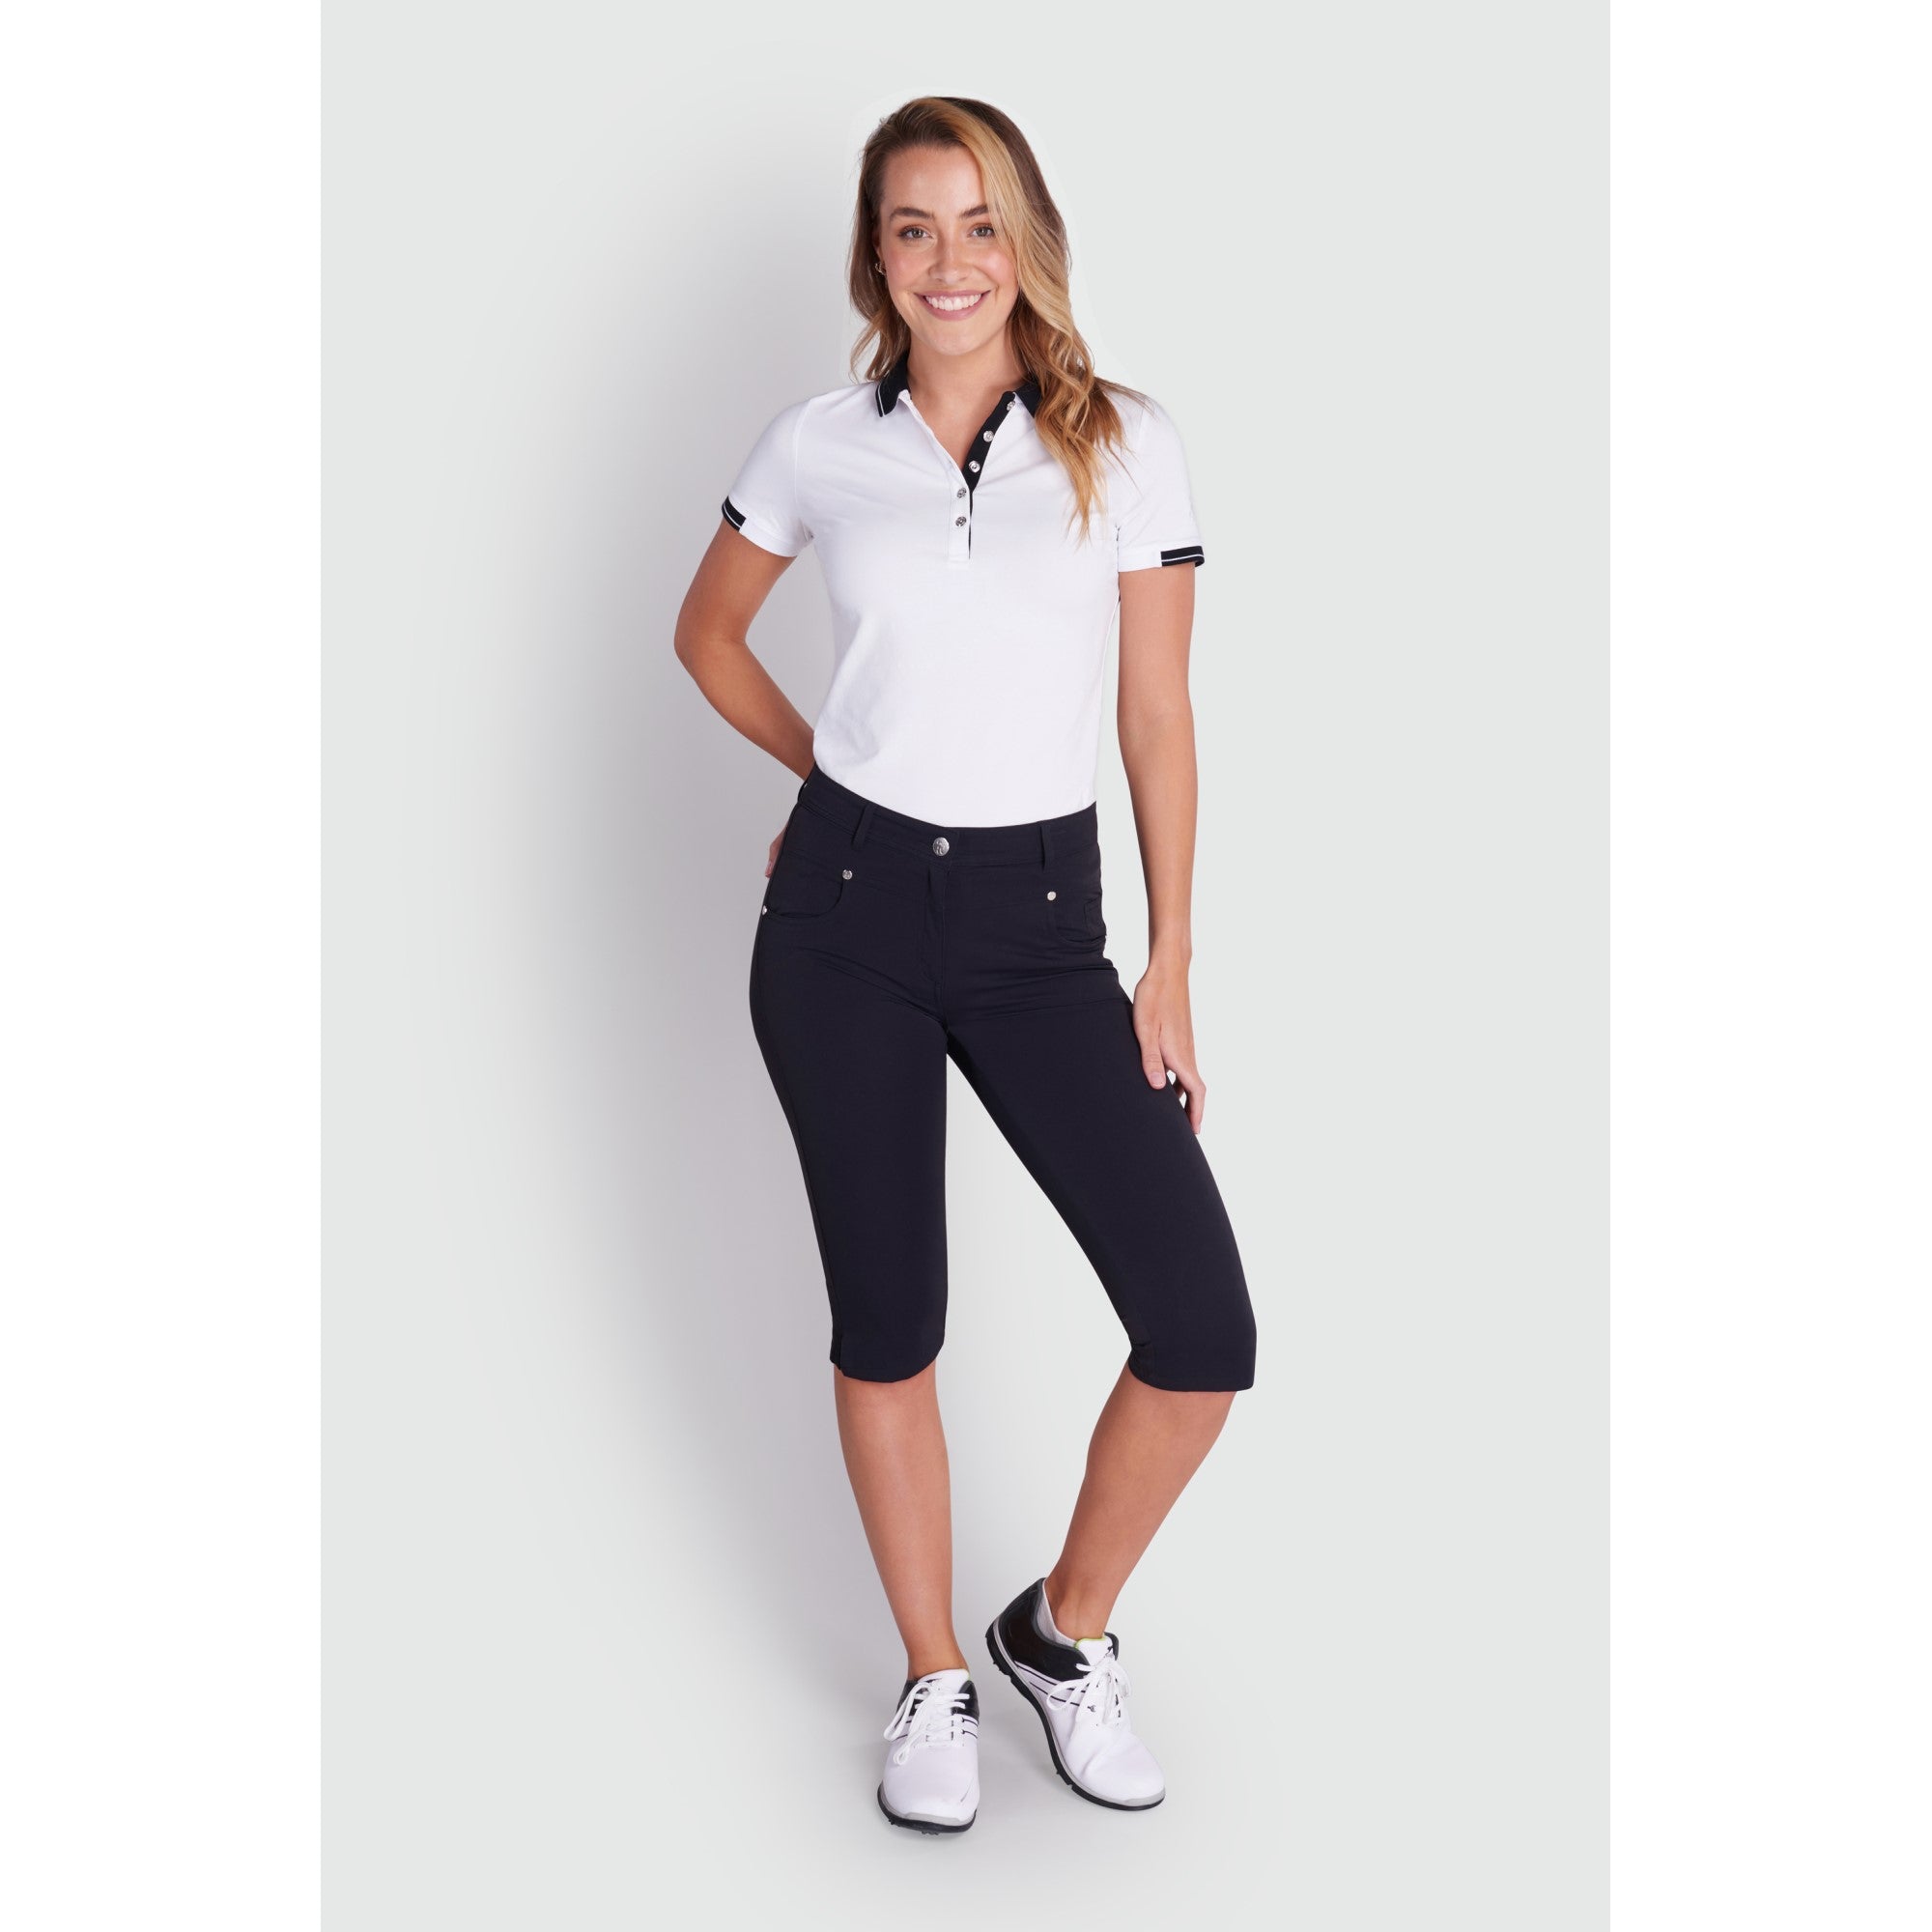 Daily Sports Magic Straight Ankle Black - Trousers Ladies